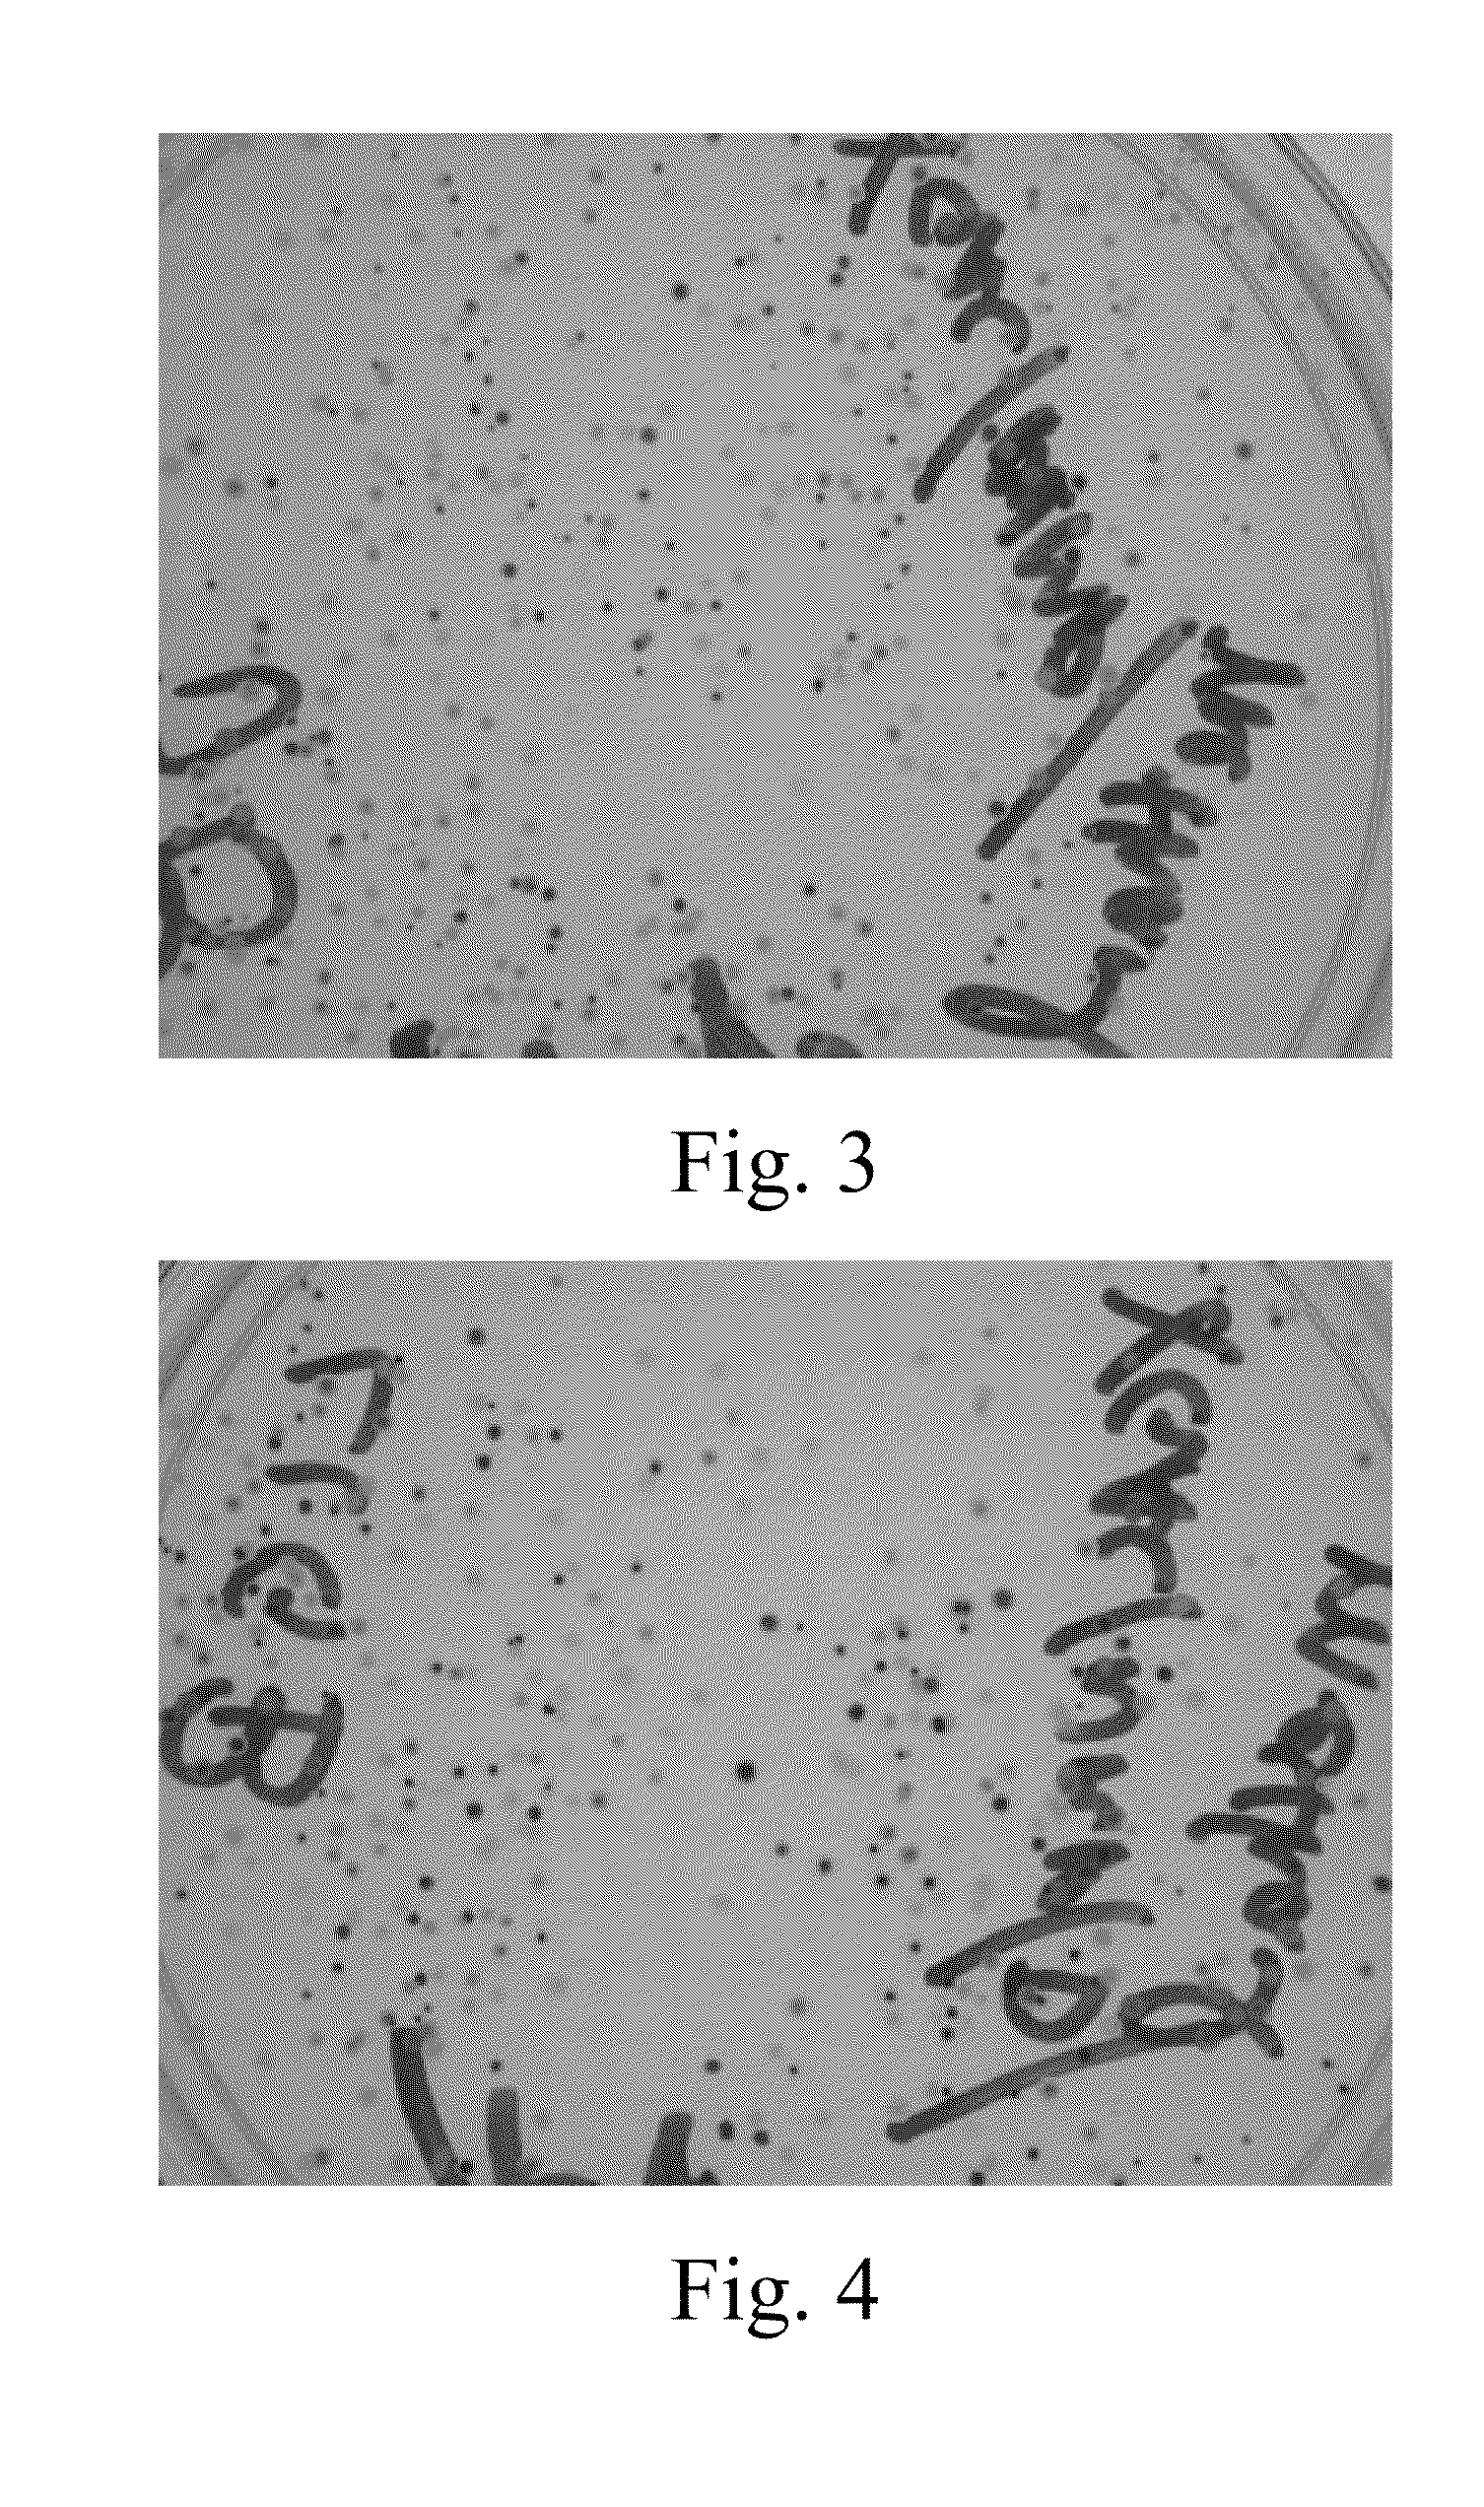 Non-toxic solvent for chromogenic substrate solution and uses thereof